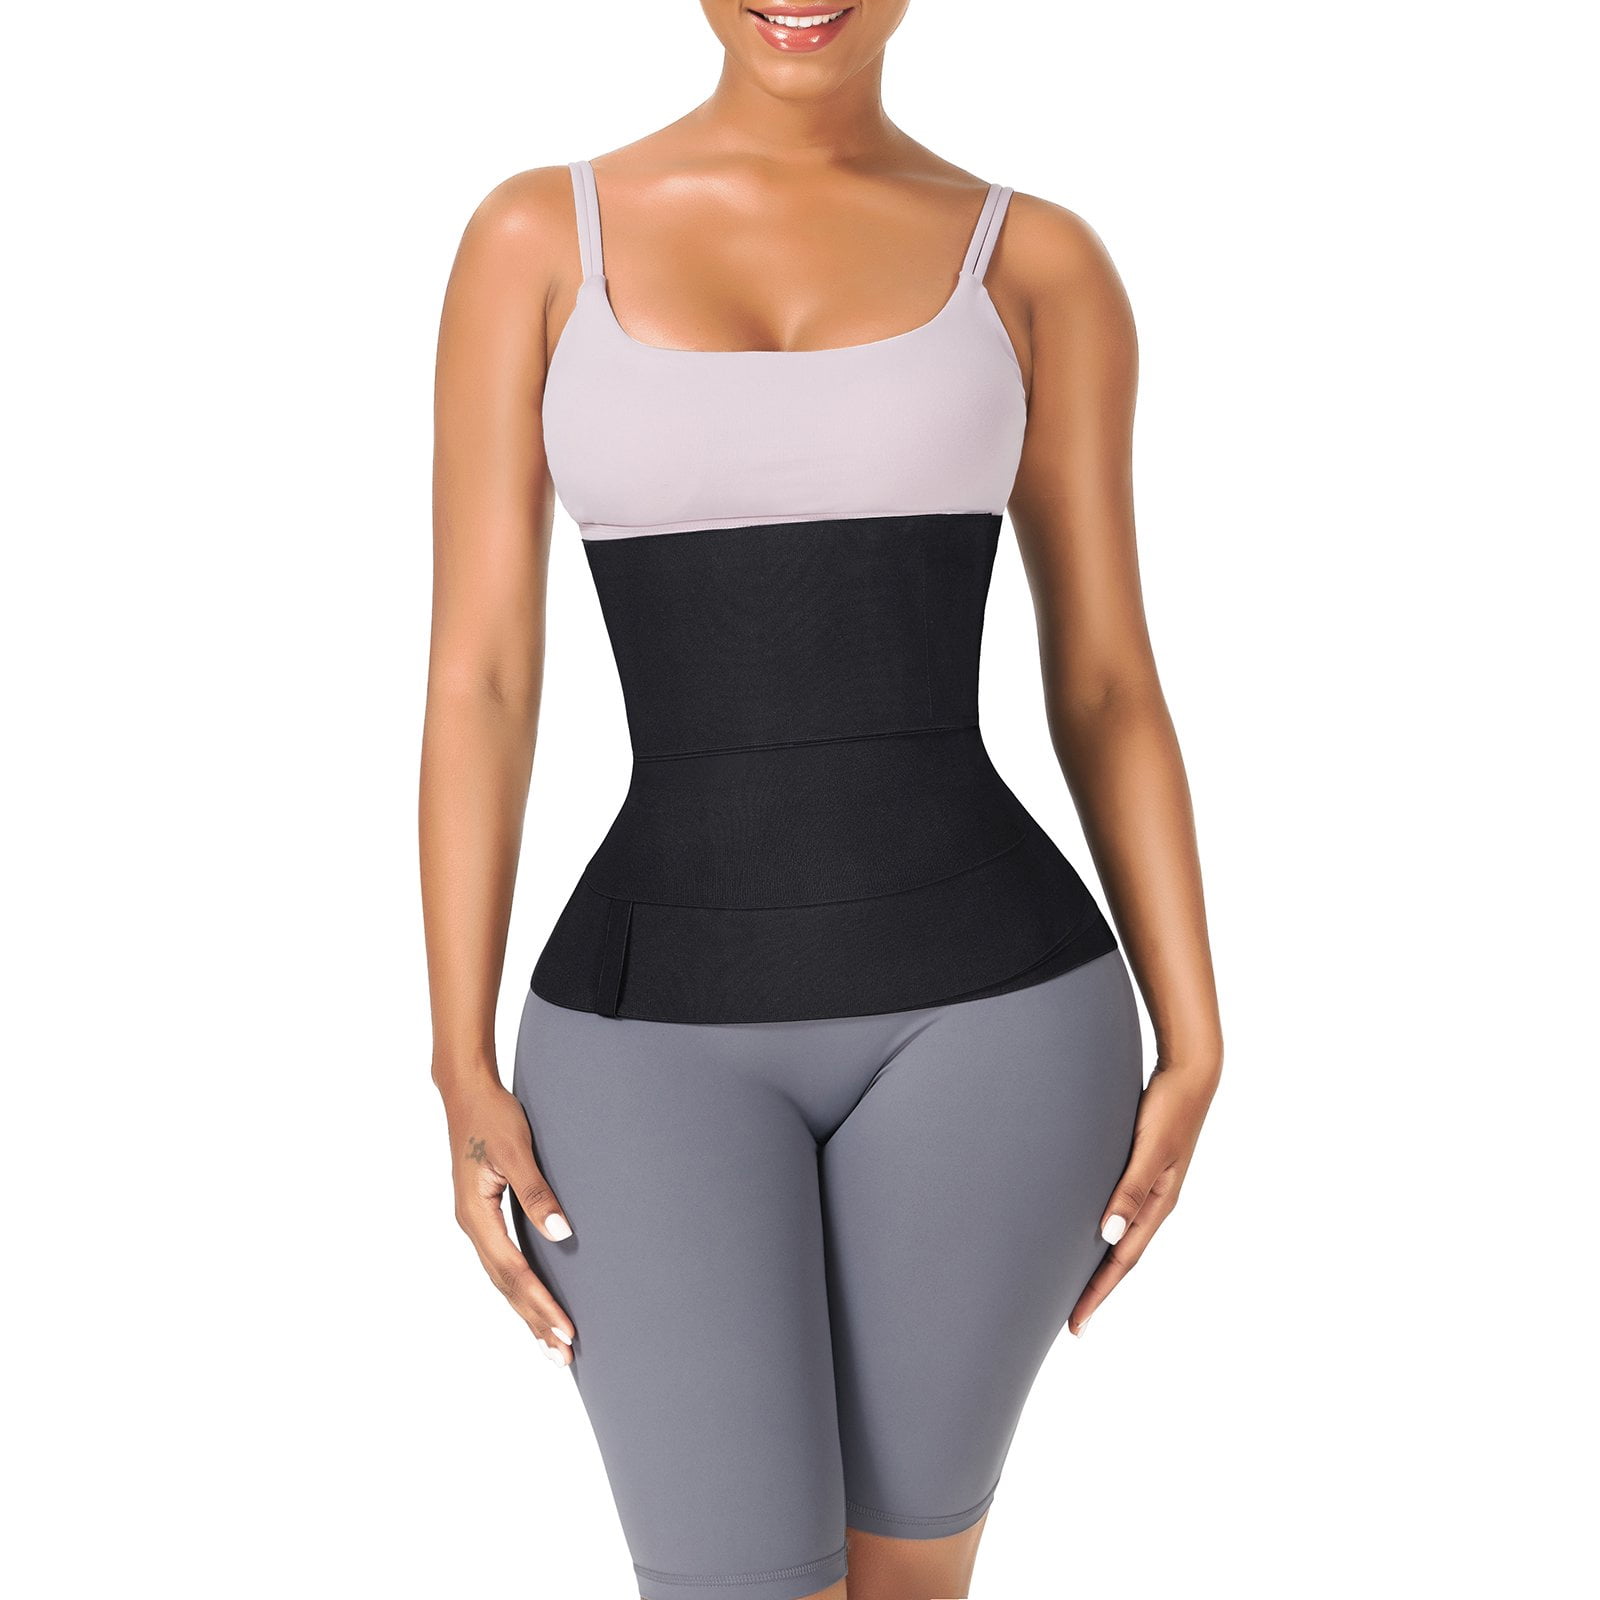 Invisible Wrap Waist Trainer for Women Tummy Wrap Waist wraps Bandage for stomach training and help sweating Black 